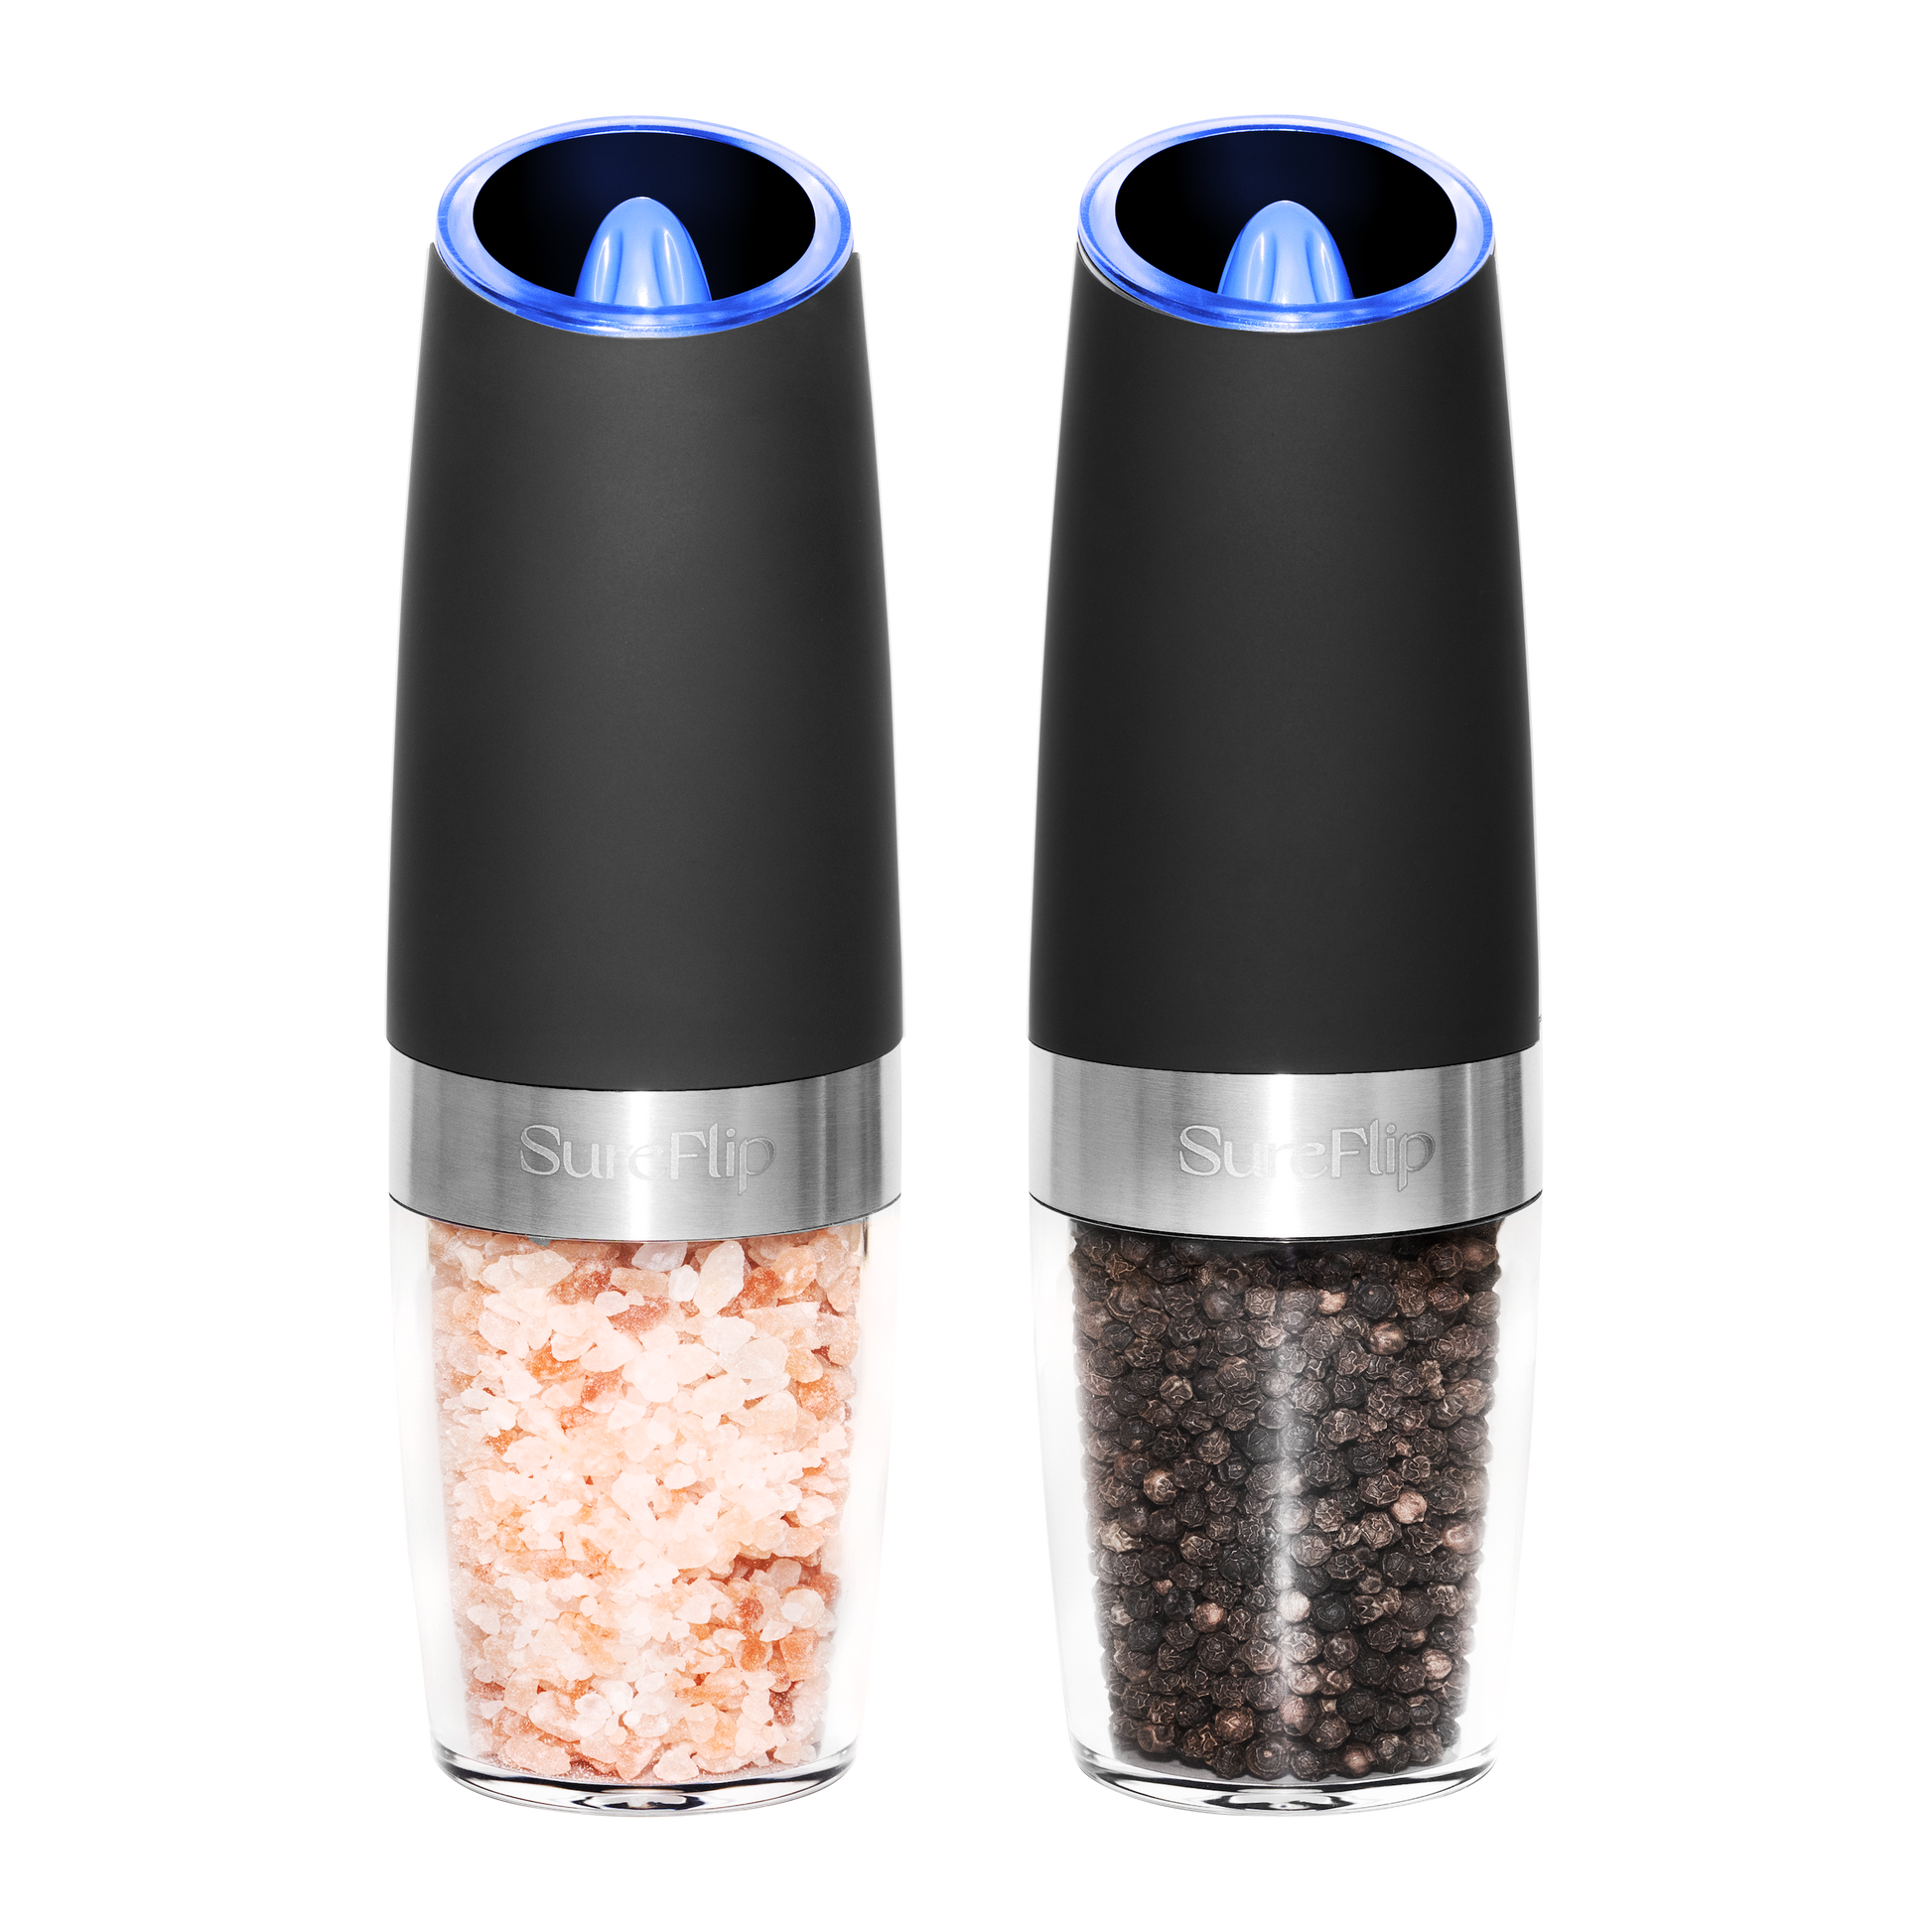 Gravity Electric Salt And Pepper Grinder Set, Automatic Pepper And